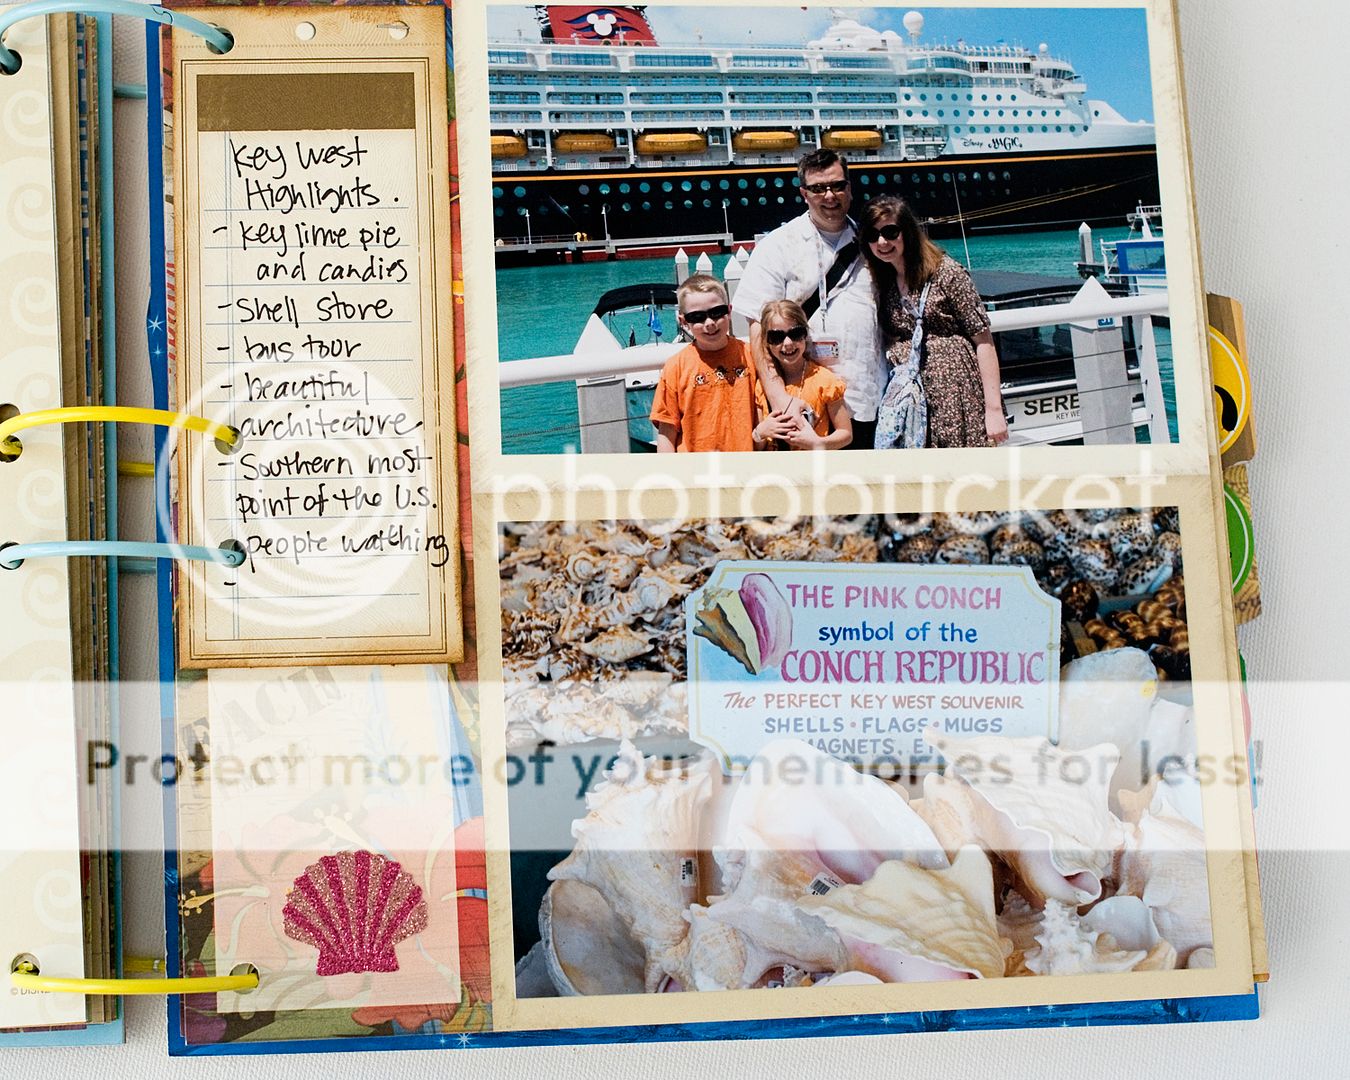 Learn how to easily create a custom photo album or scrapbook of your Disney Cruise Vacation